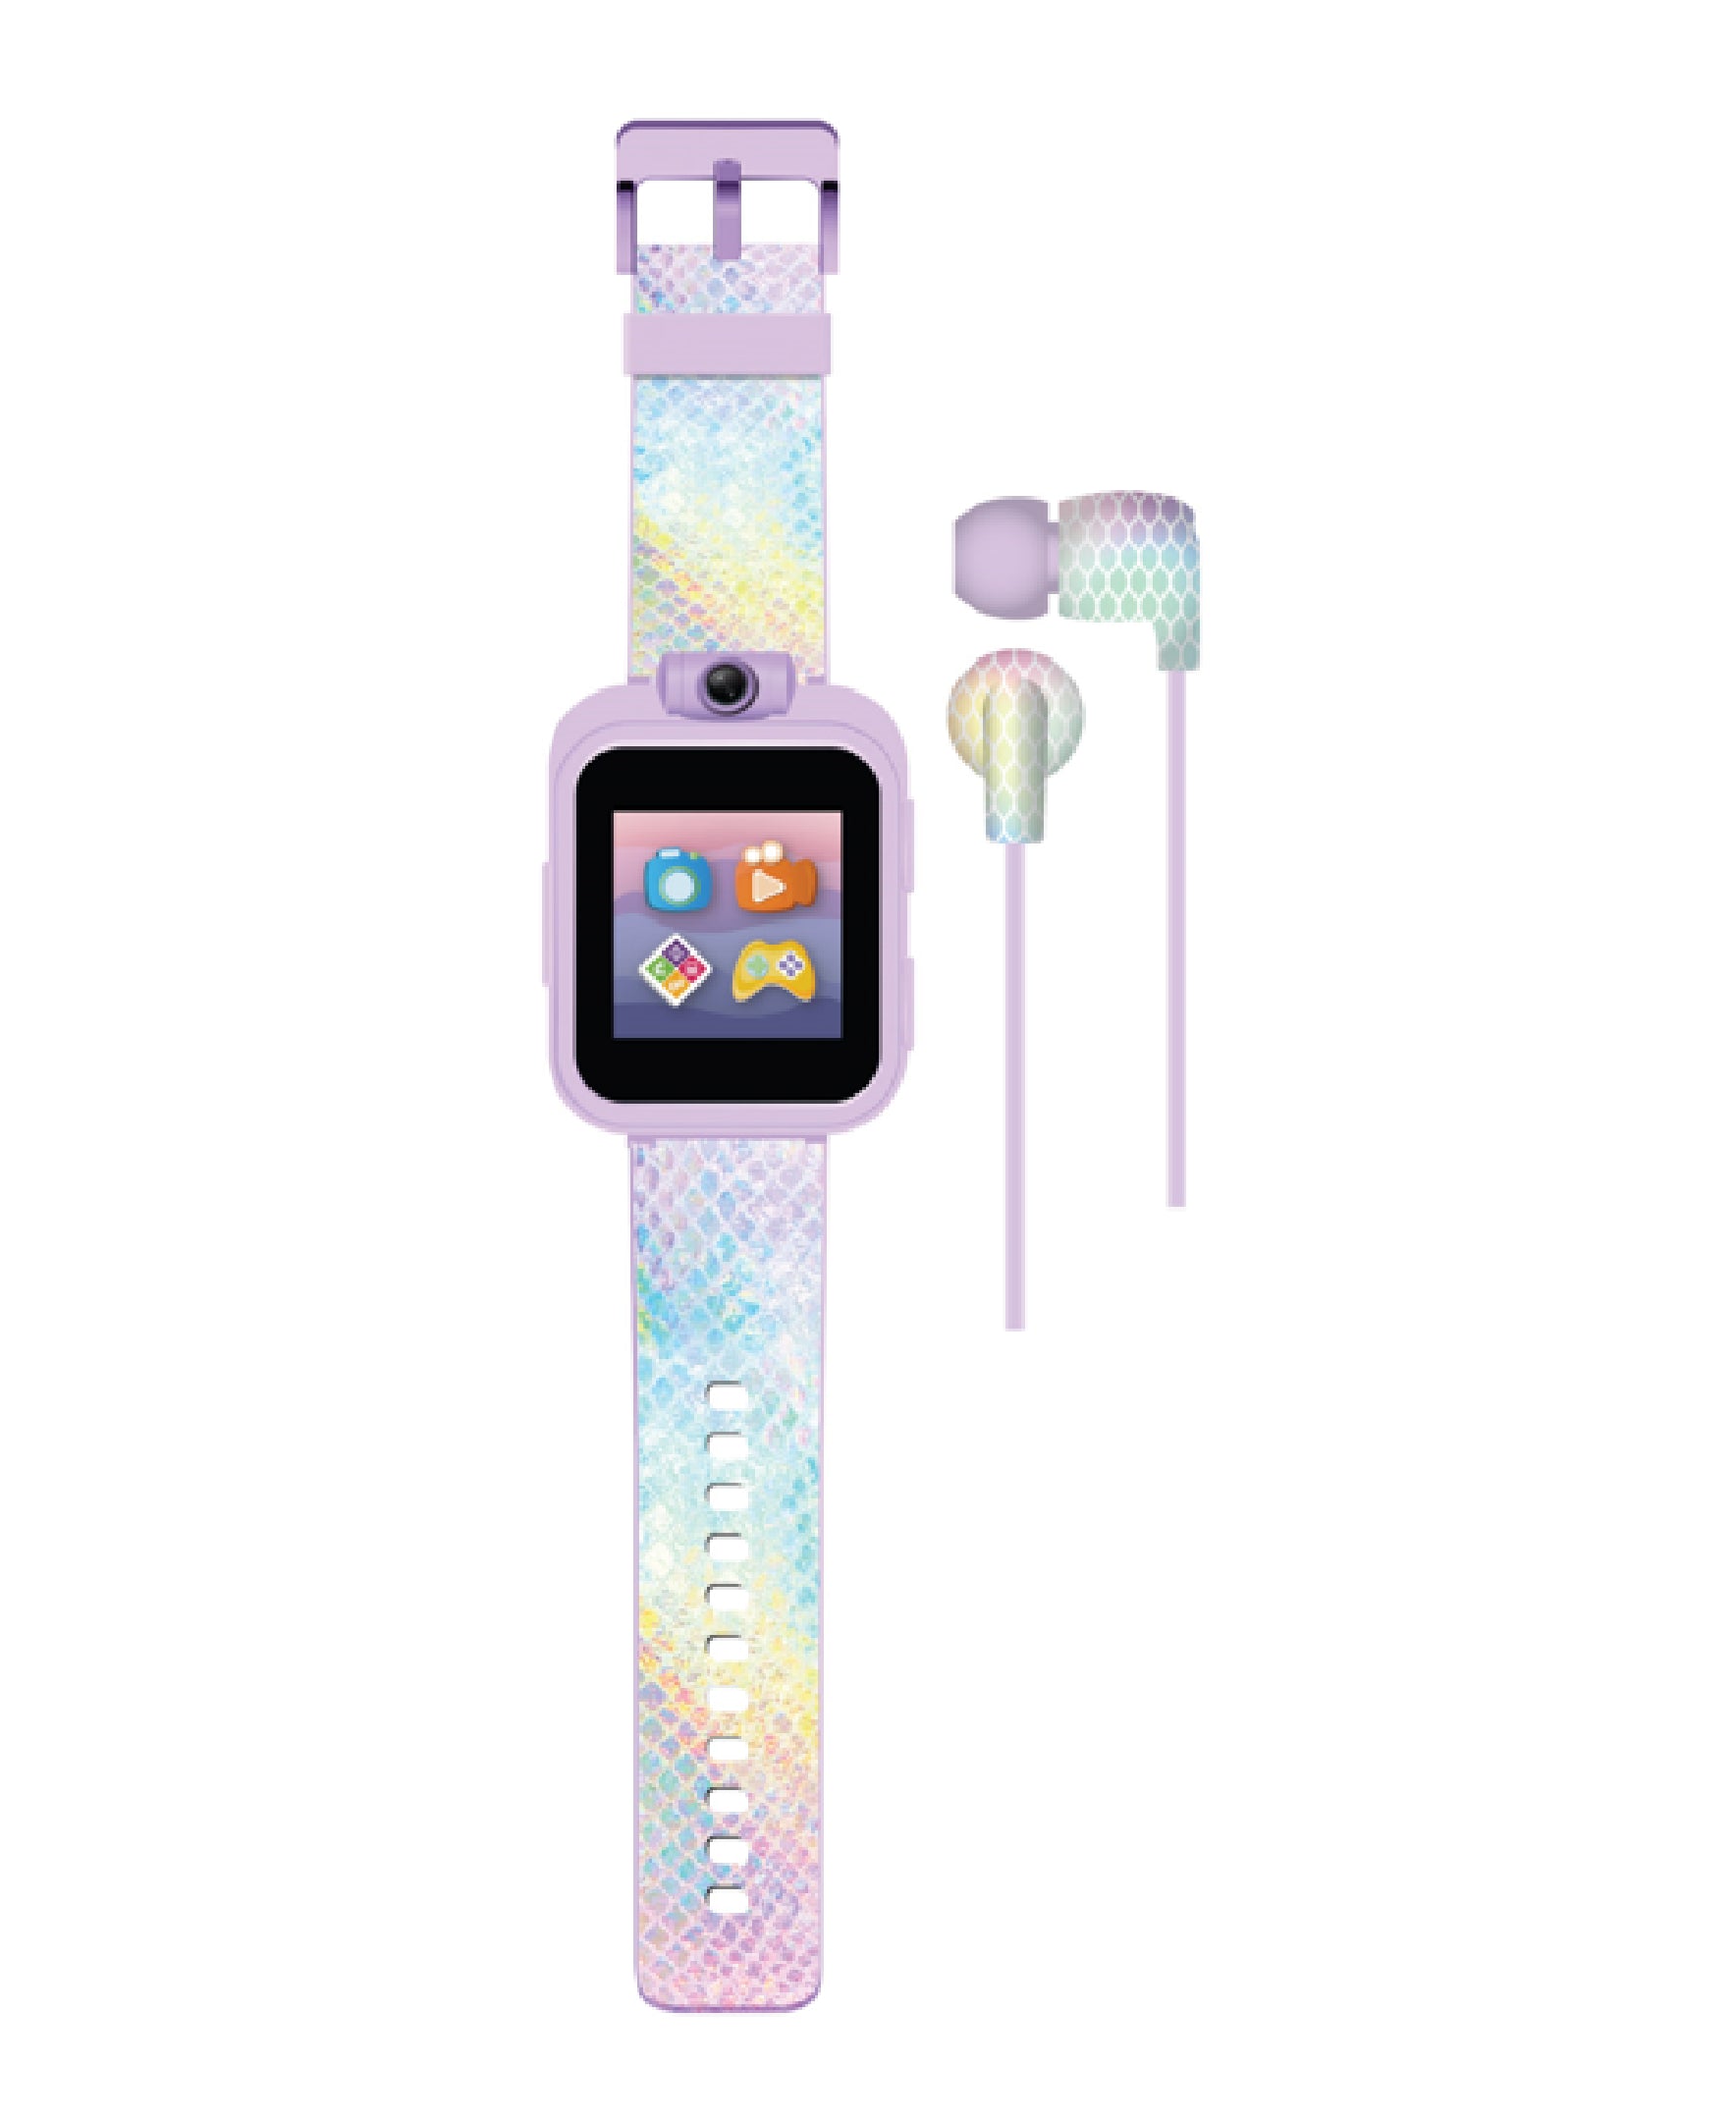 Playzoom 2 Kids Smartwatch & Earbuds Set: Textured Holographic